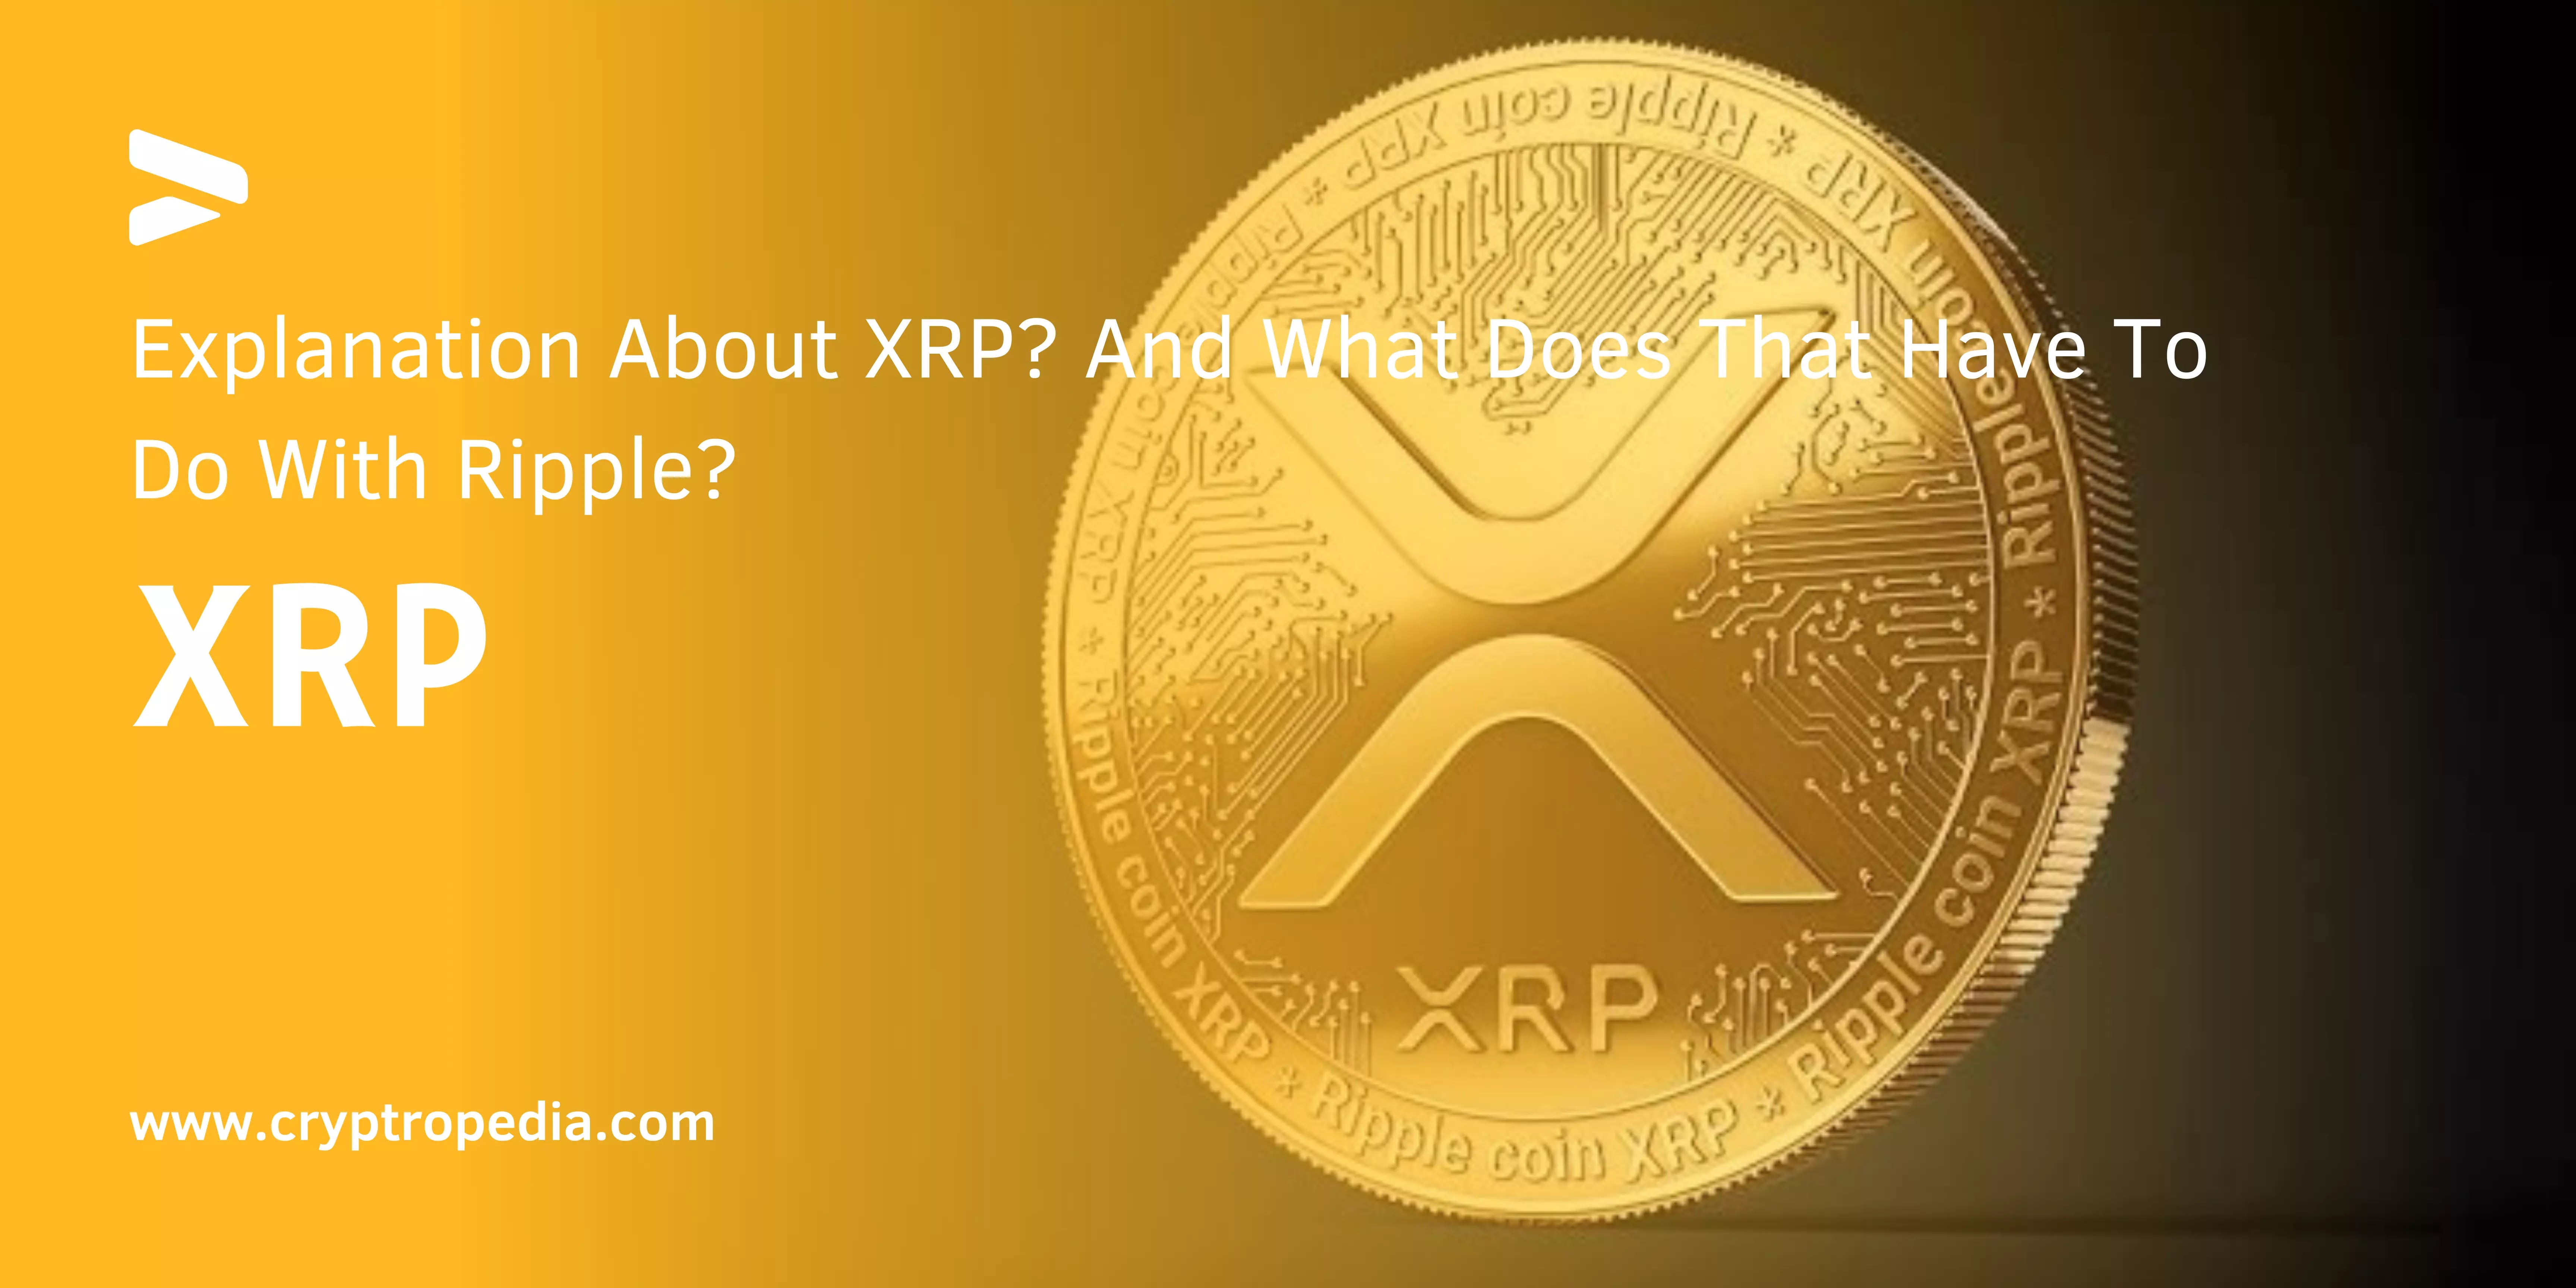 Explanation About XRP And What Does That Have To Do With Ripple